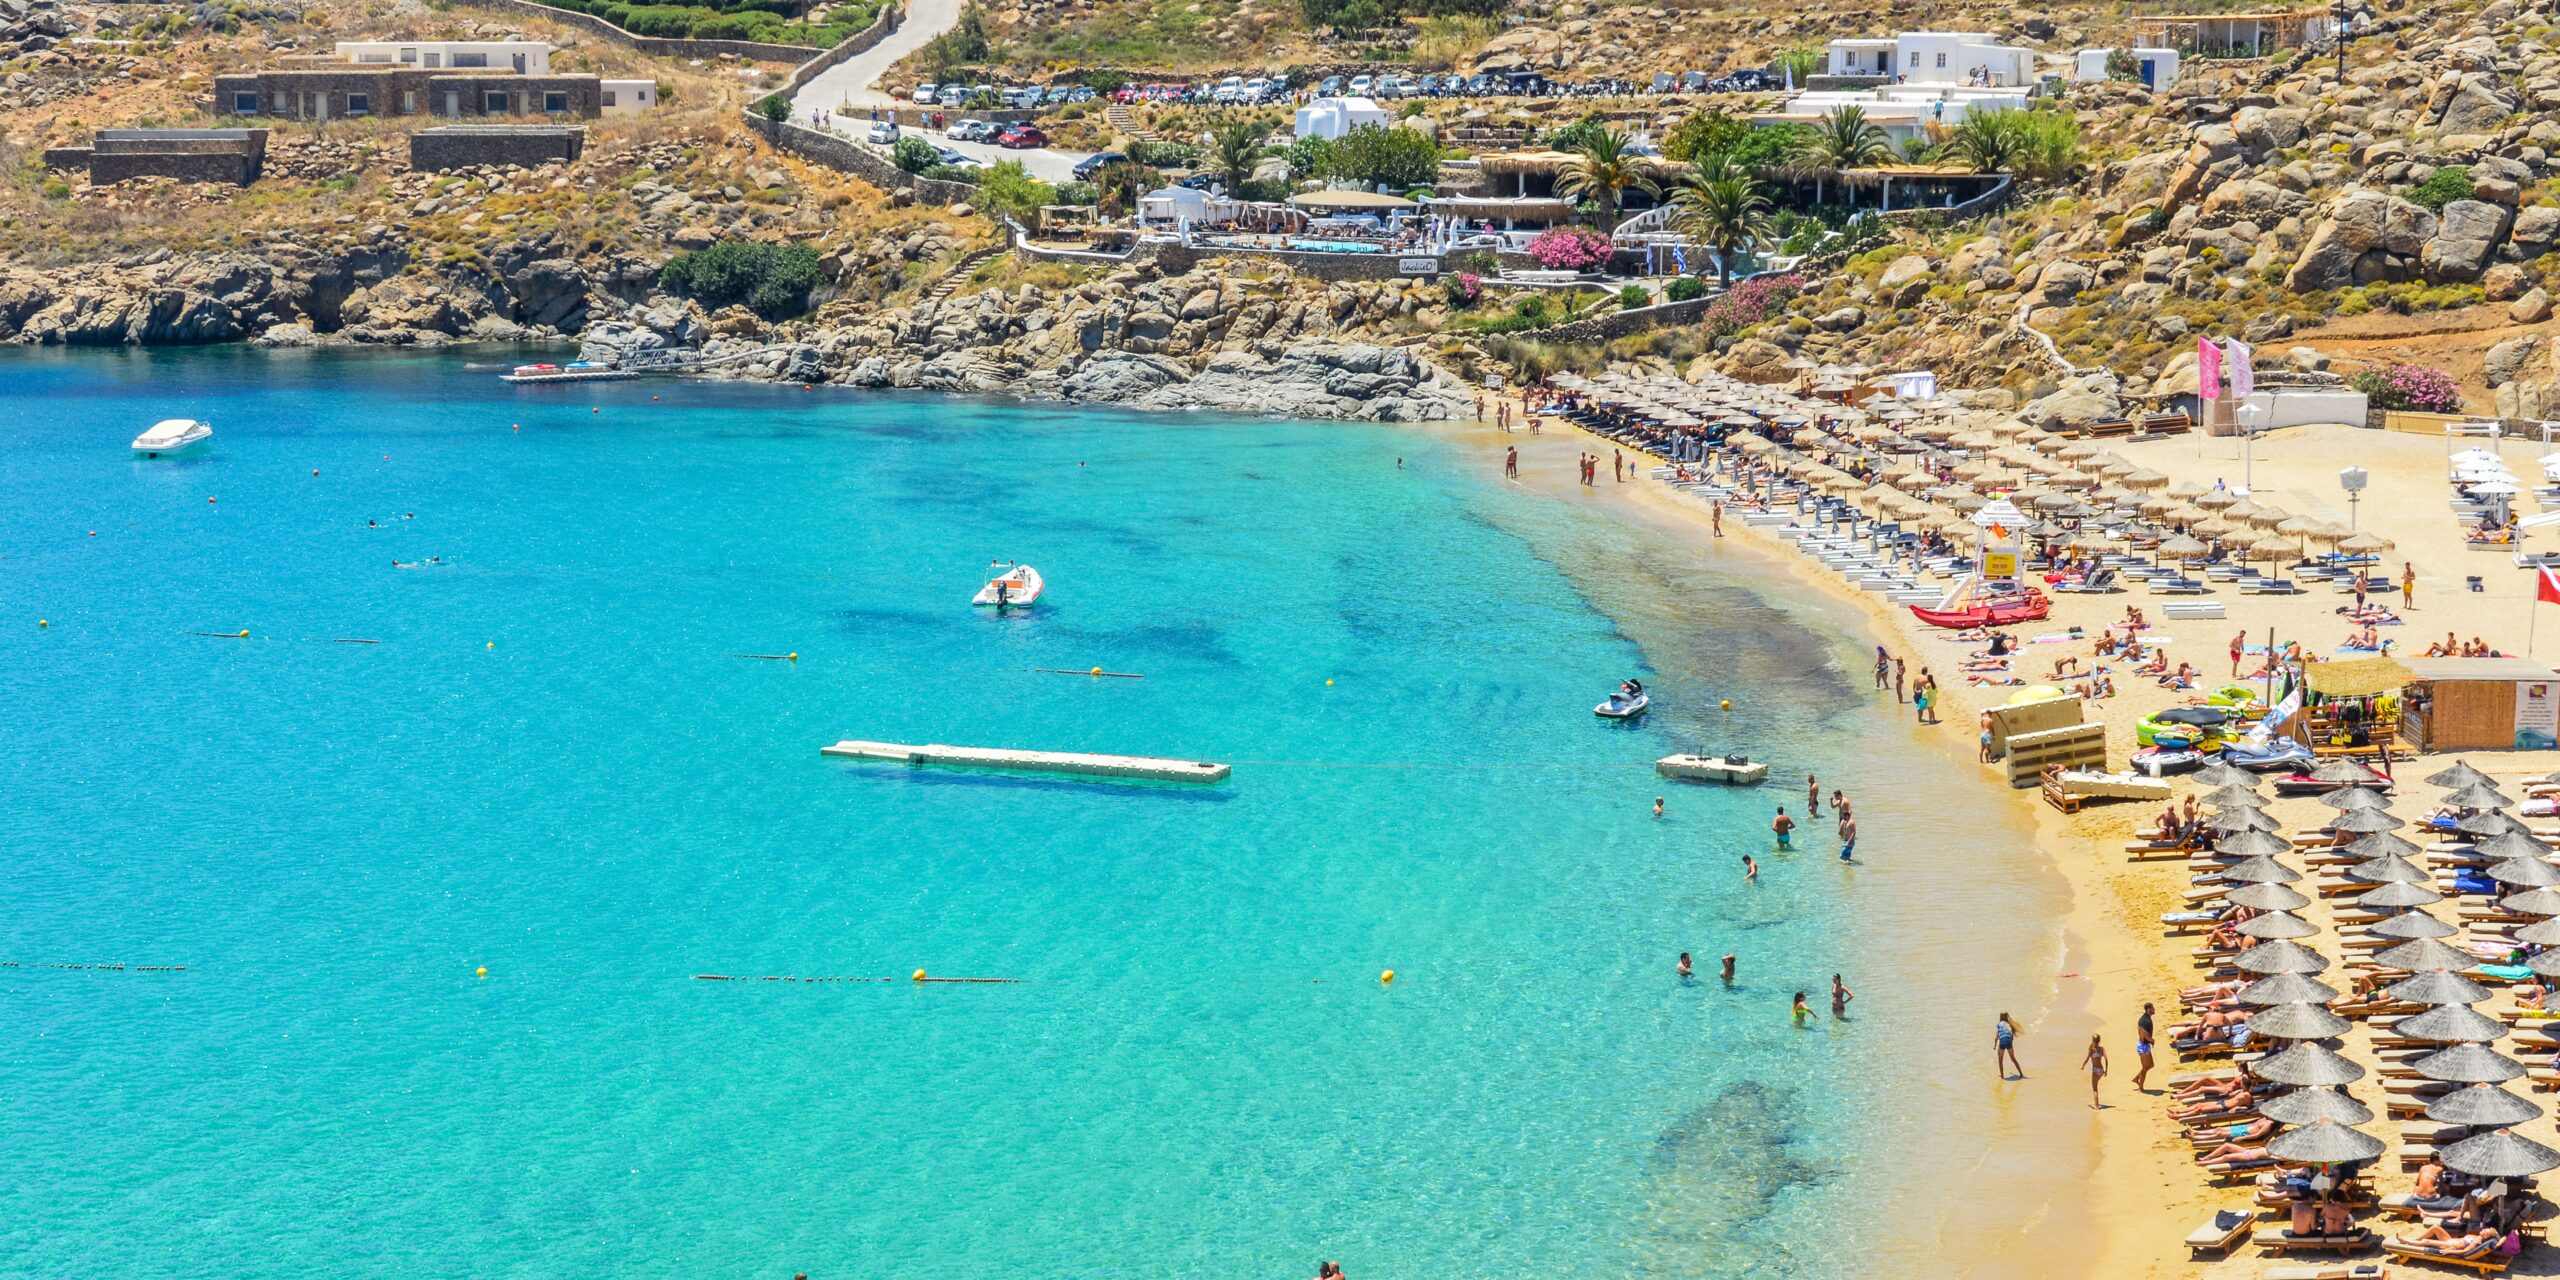 Beachgoers enjoy the sun and clear turquoise waters at the bustling Paradise Beach in Mykonos.